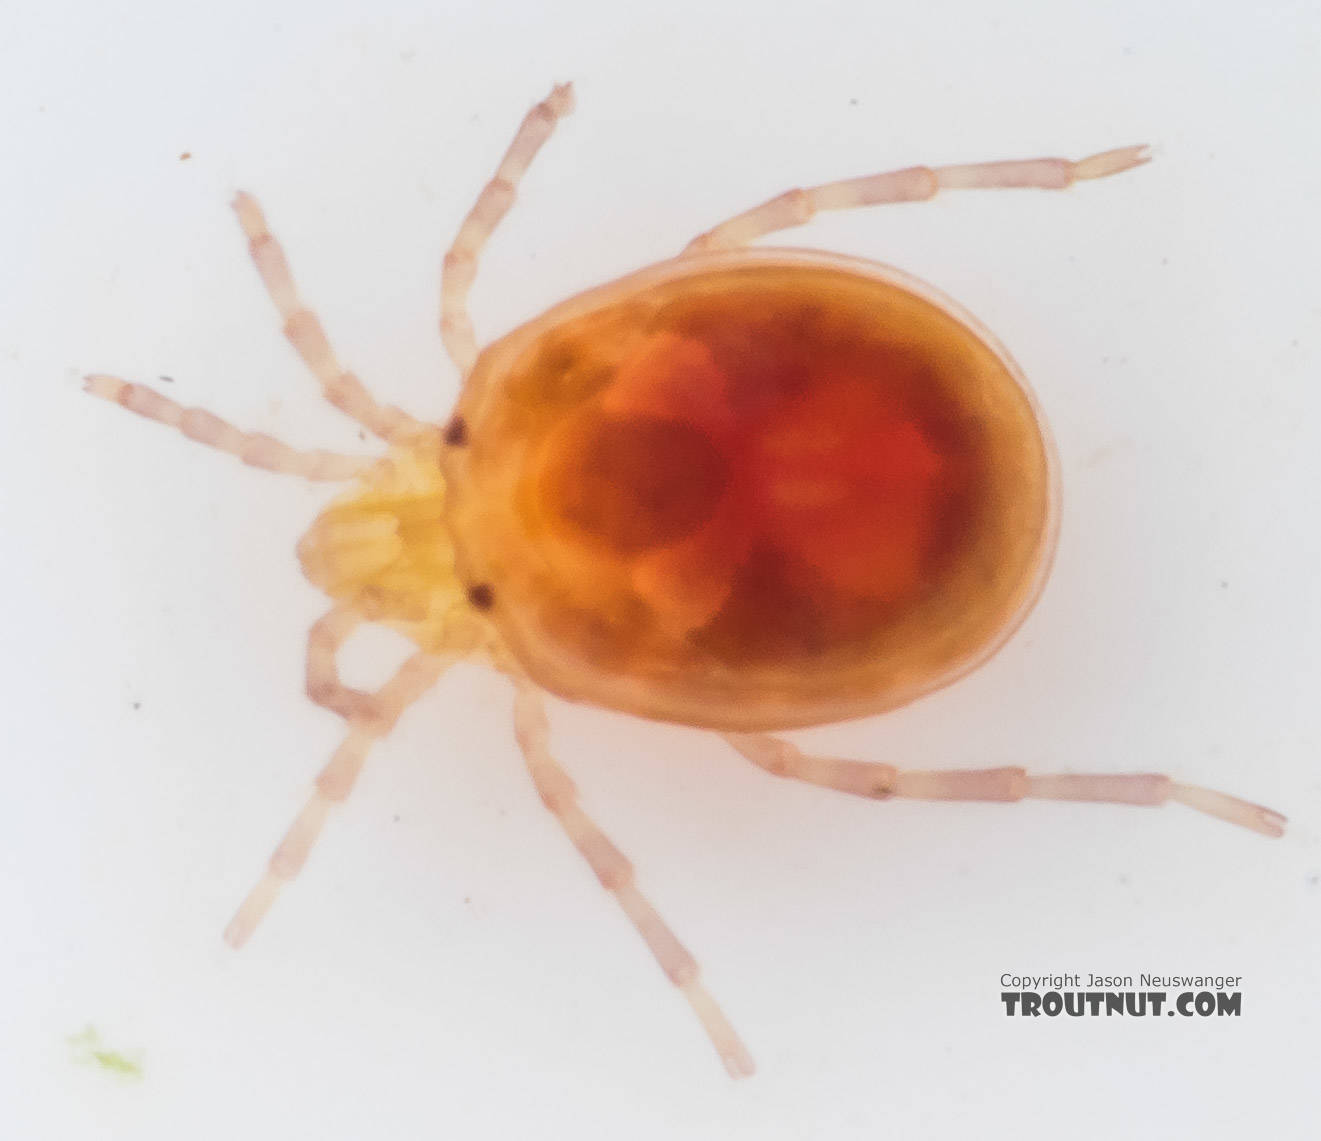 Acari (Mites) Mite Adult from the South Fork Snoqualmie River in Washington